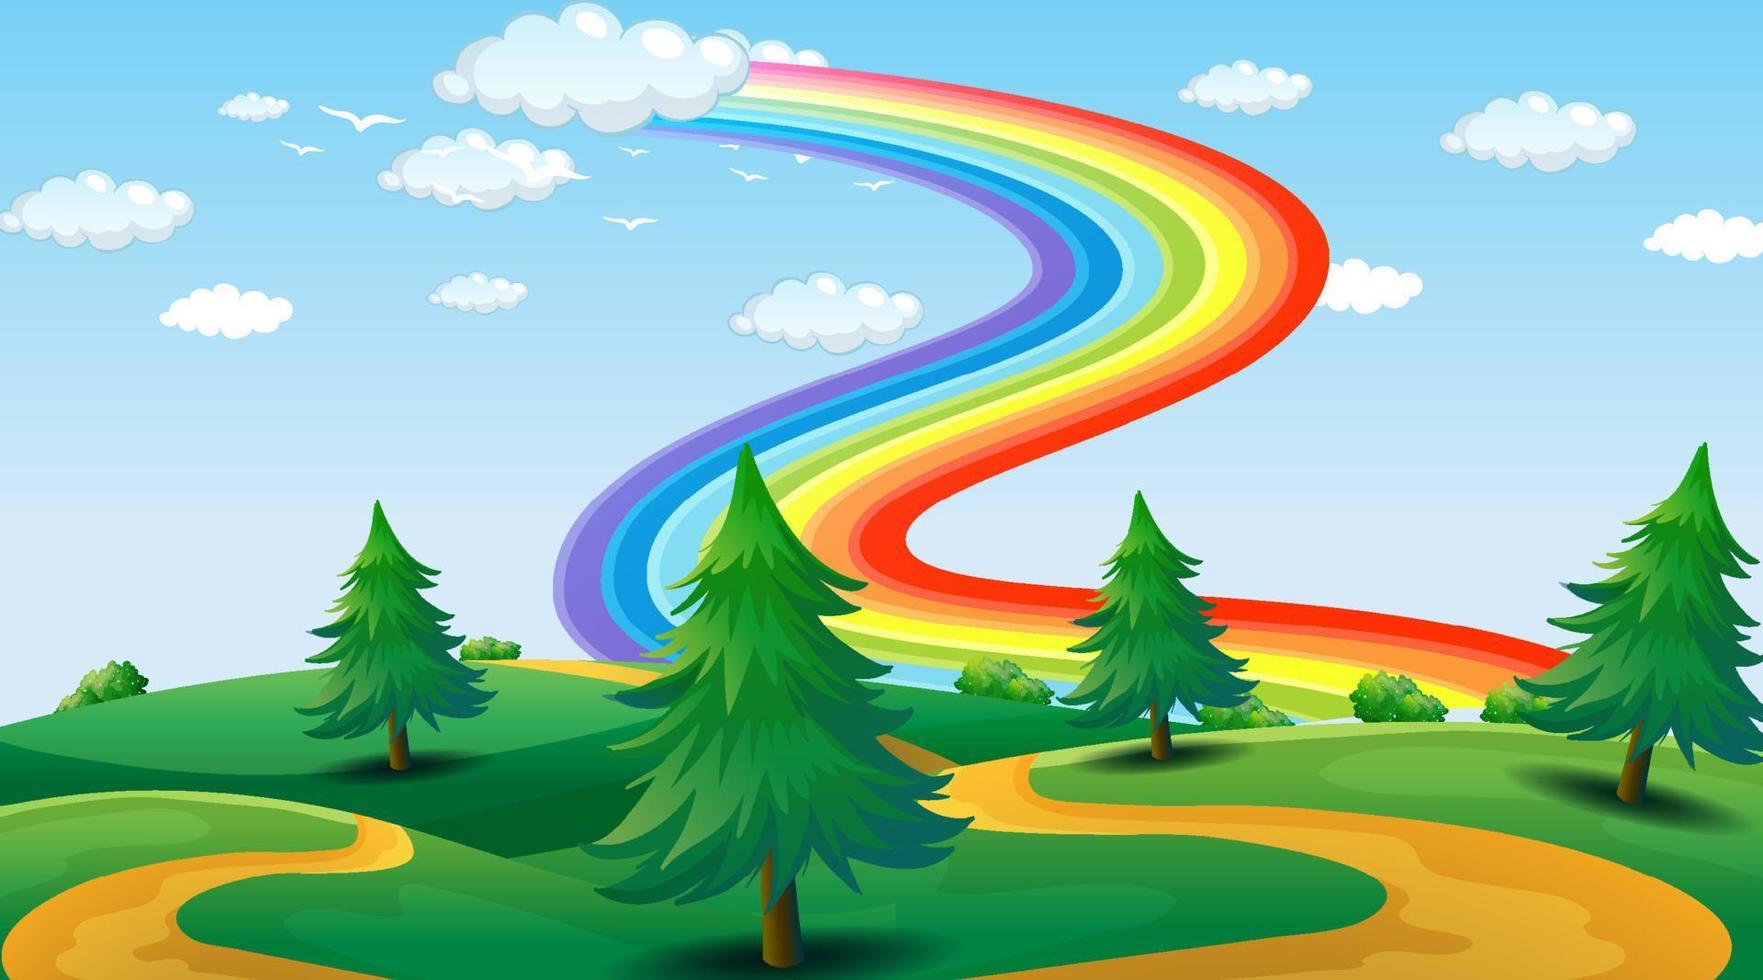 Park landscape scene with rainbow in the sky vector